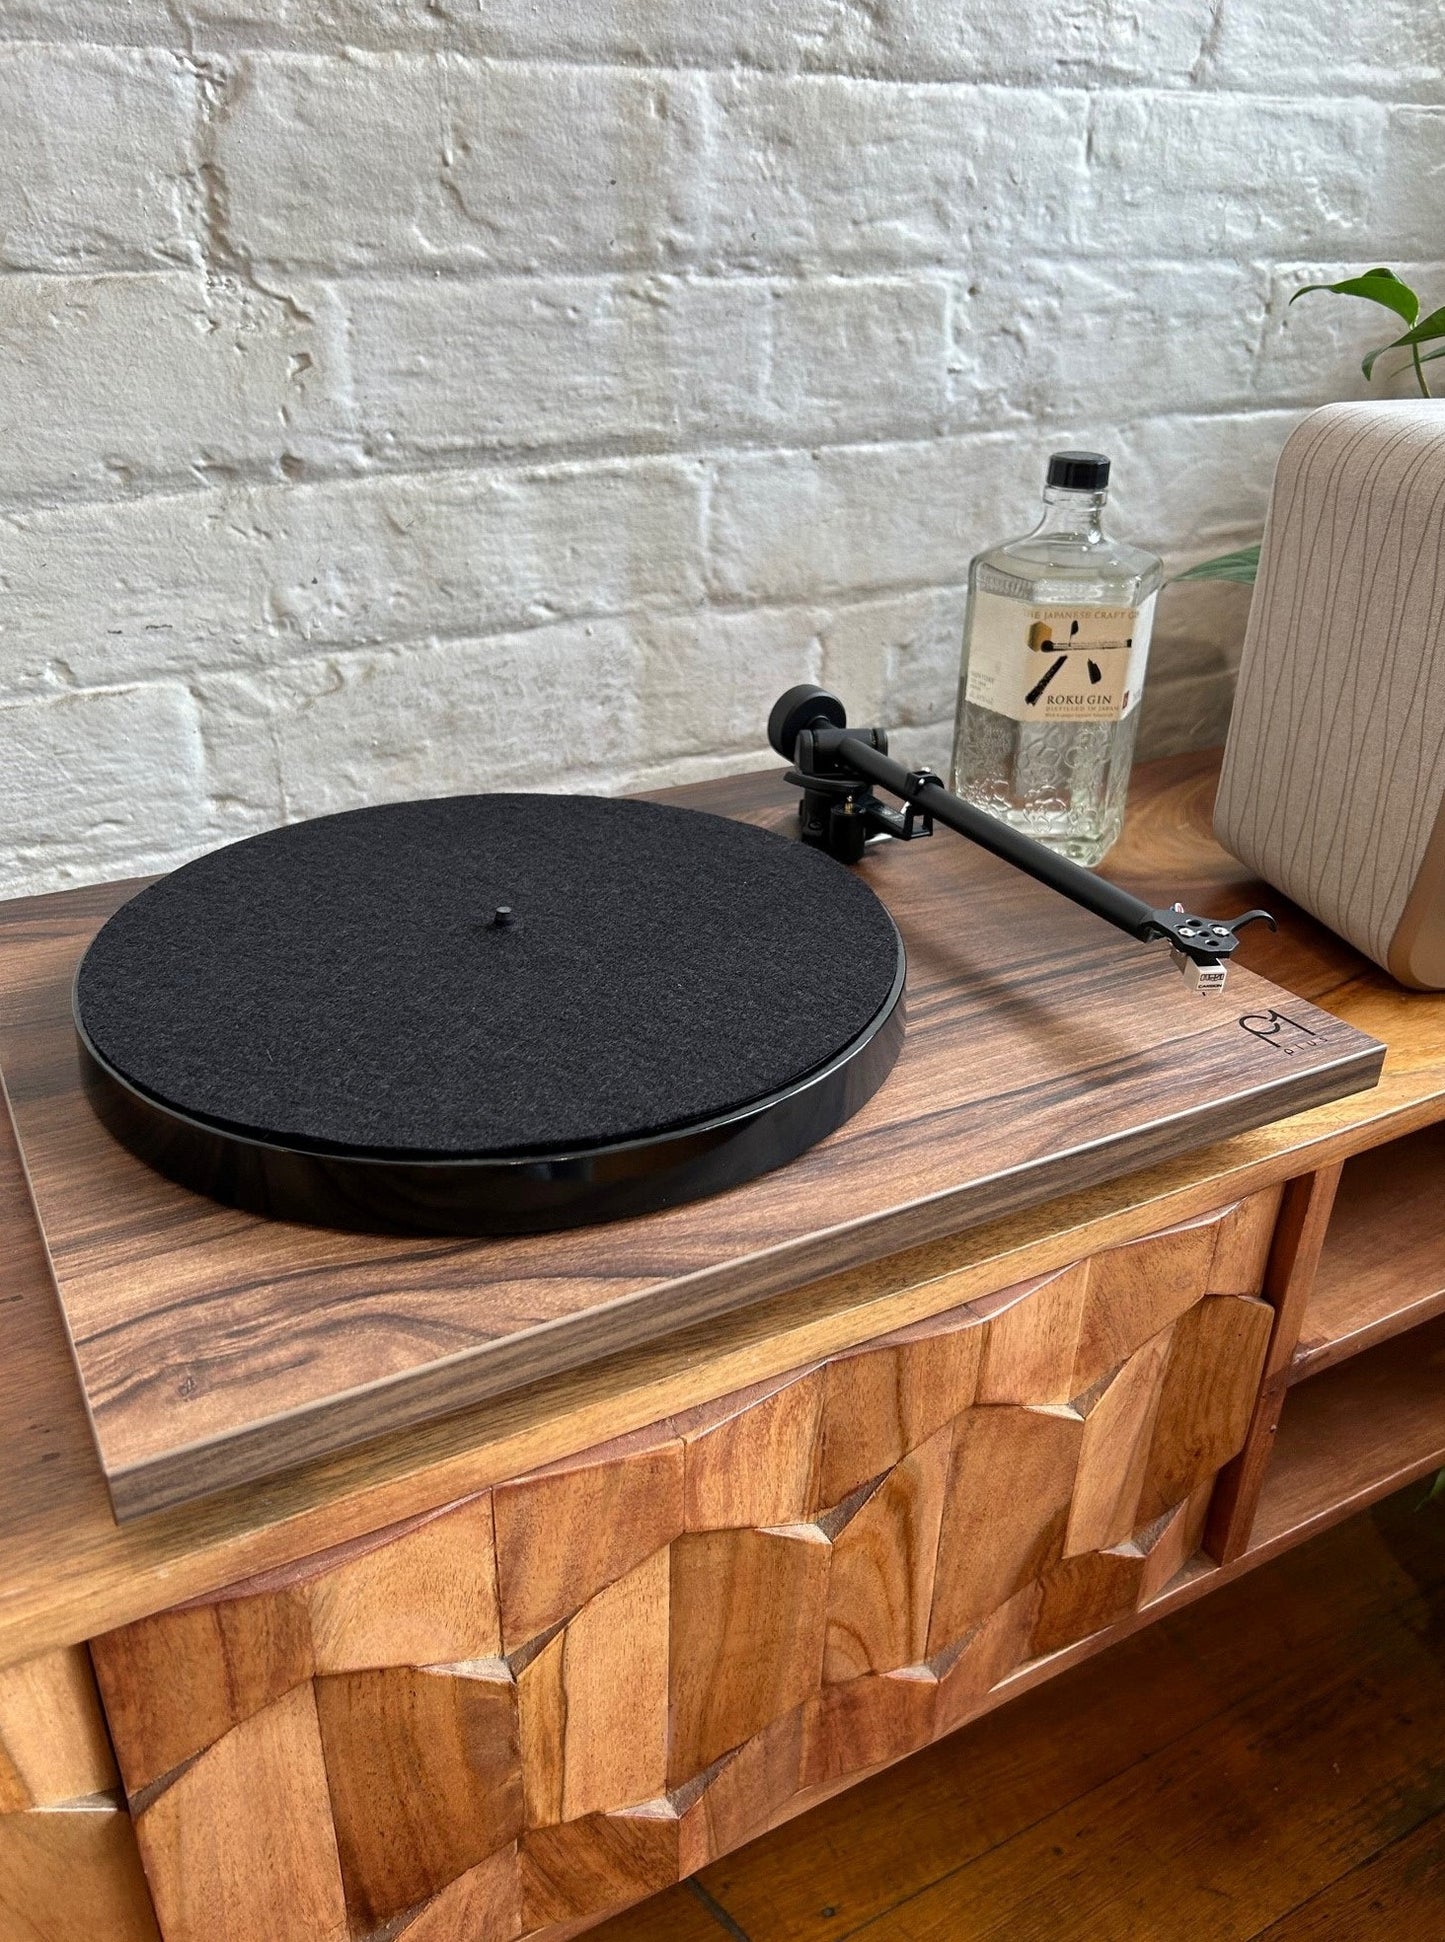 The Revolver Turntable Pack